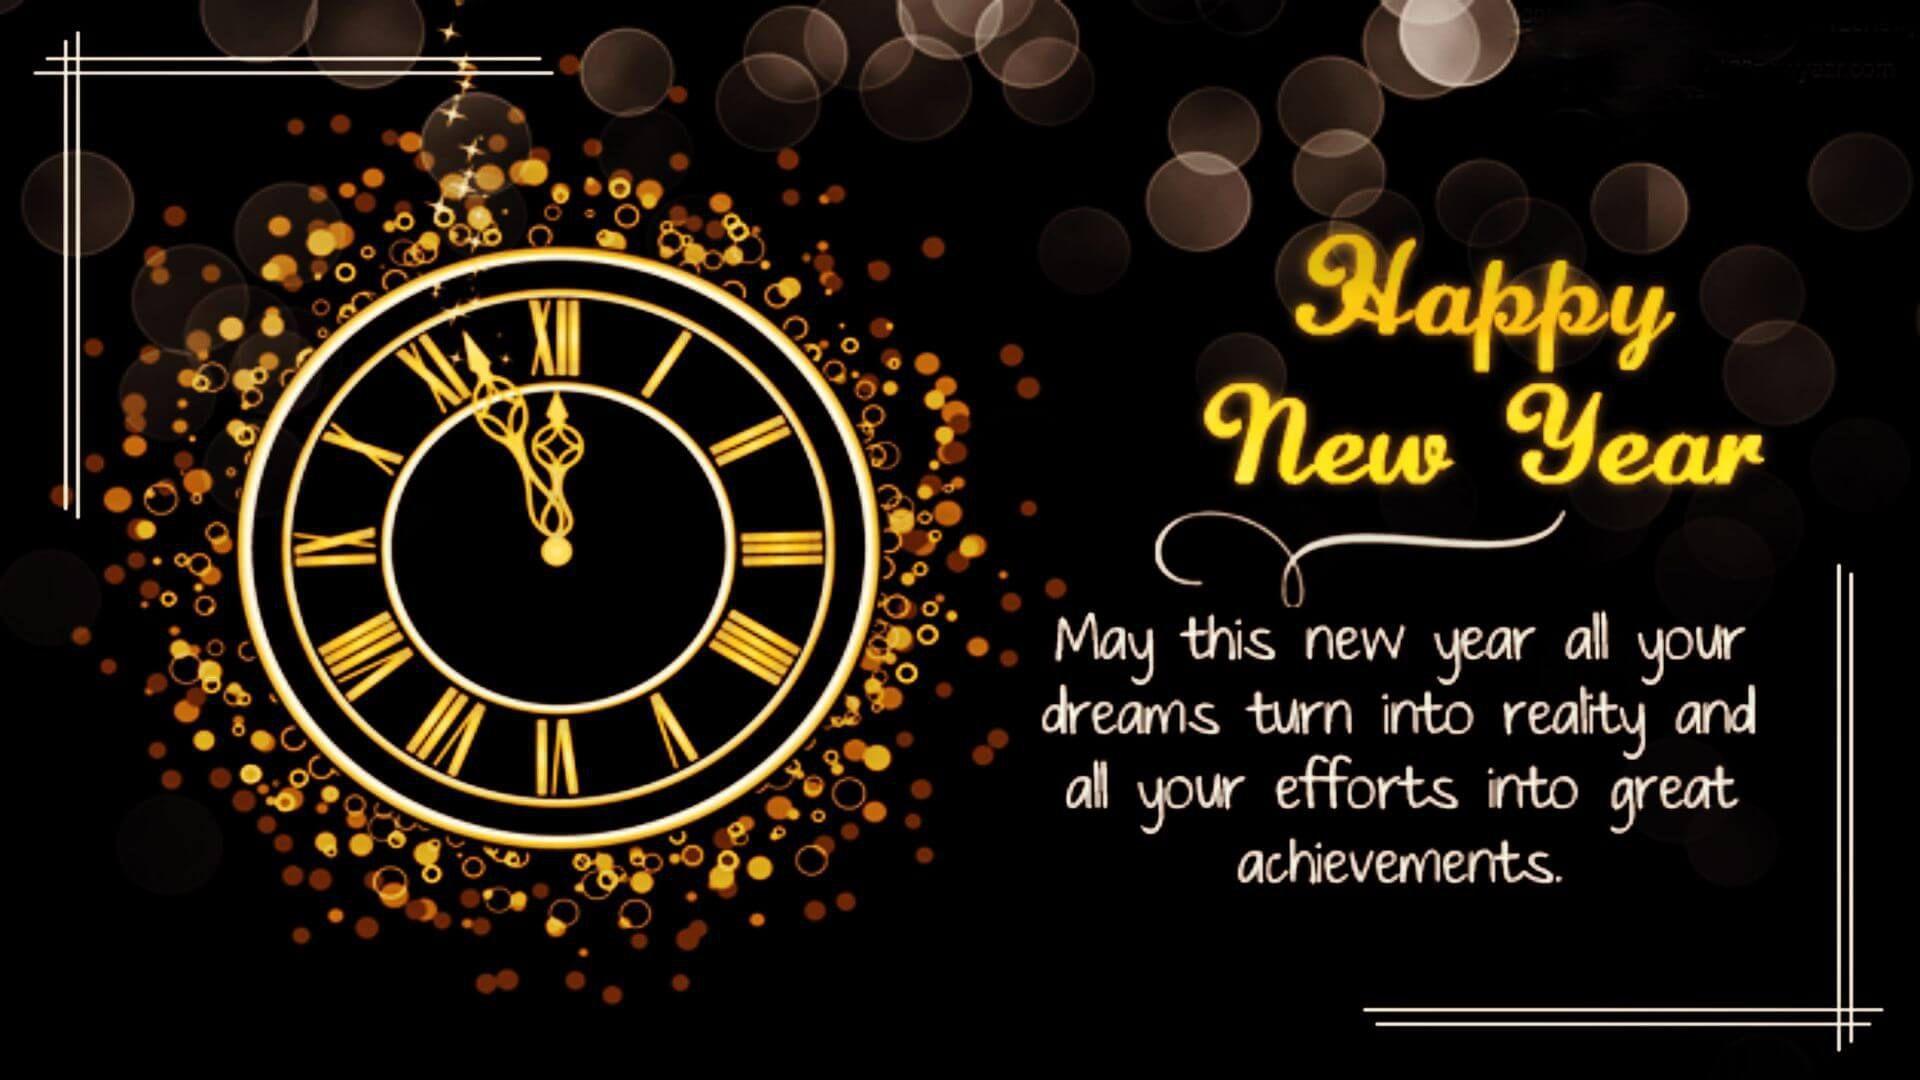 Bye Bye 2018 Welcome 2019 Wishes, SMS Messages, Quotes and Picture